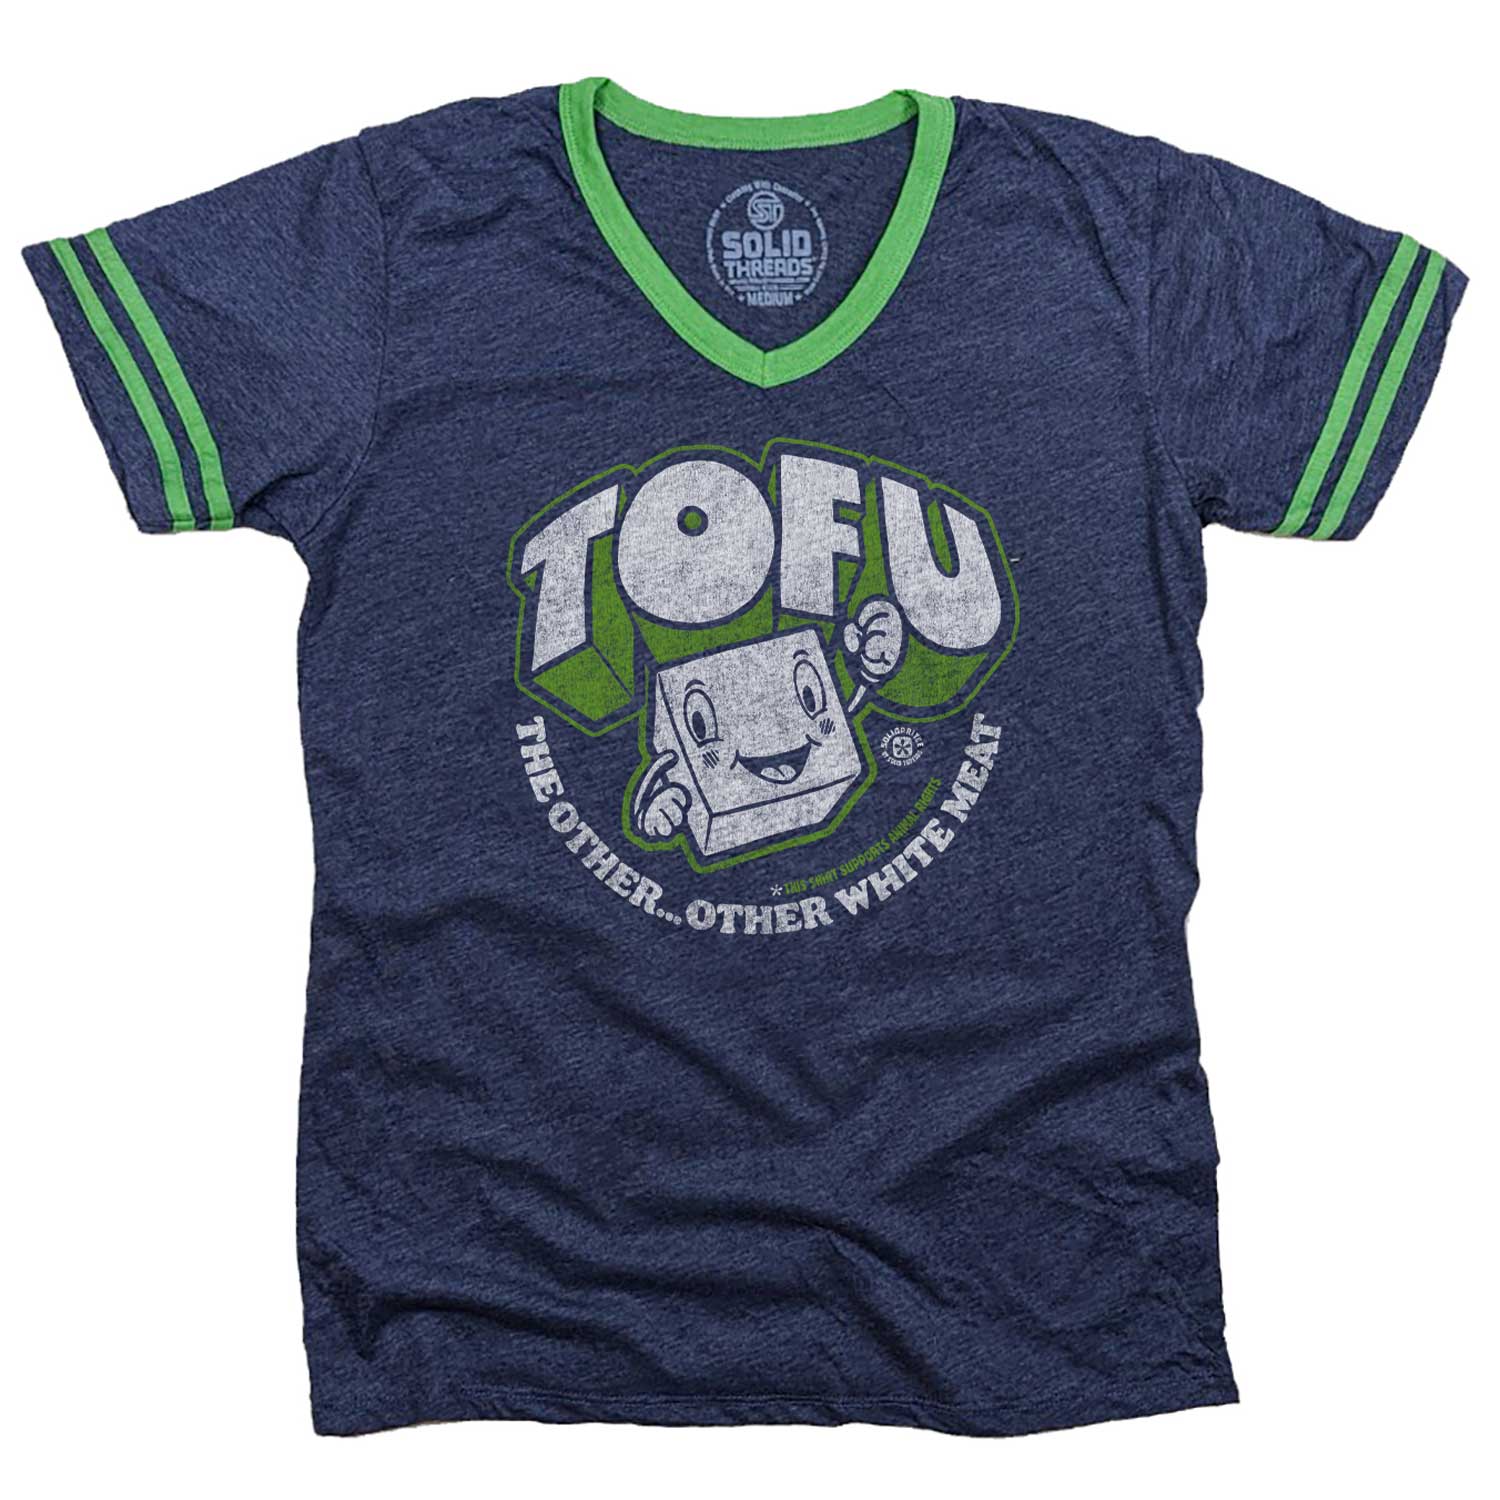 Men's Tofu, The Other Other White Meat Vintage Graphic V-Neck Tee | Cool Animal Rights T-shirt | Solid Threads